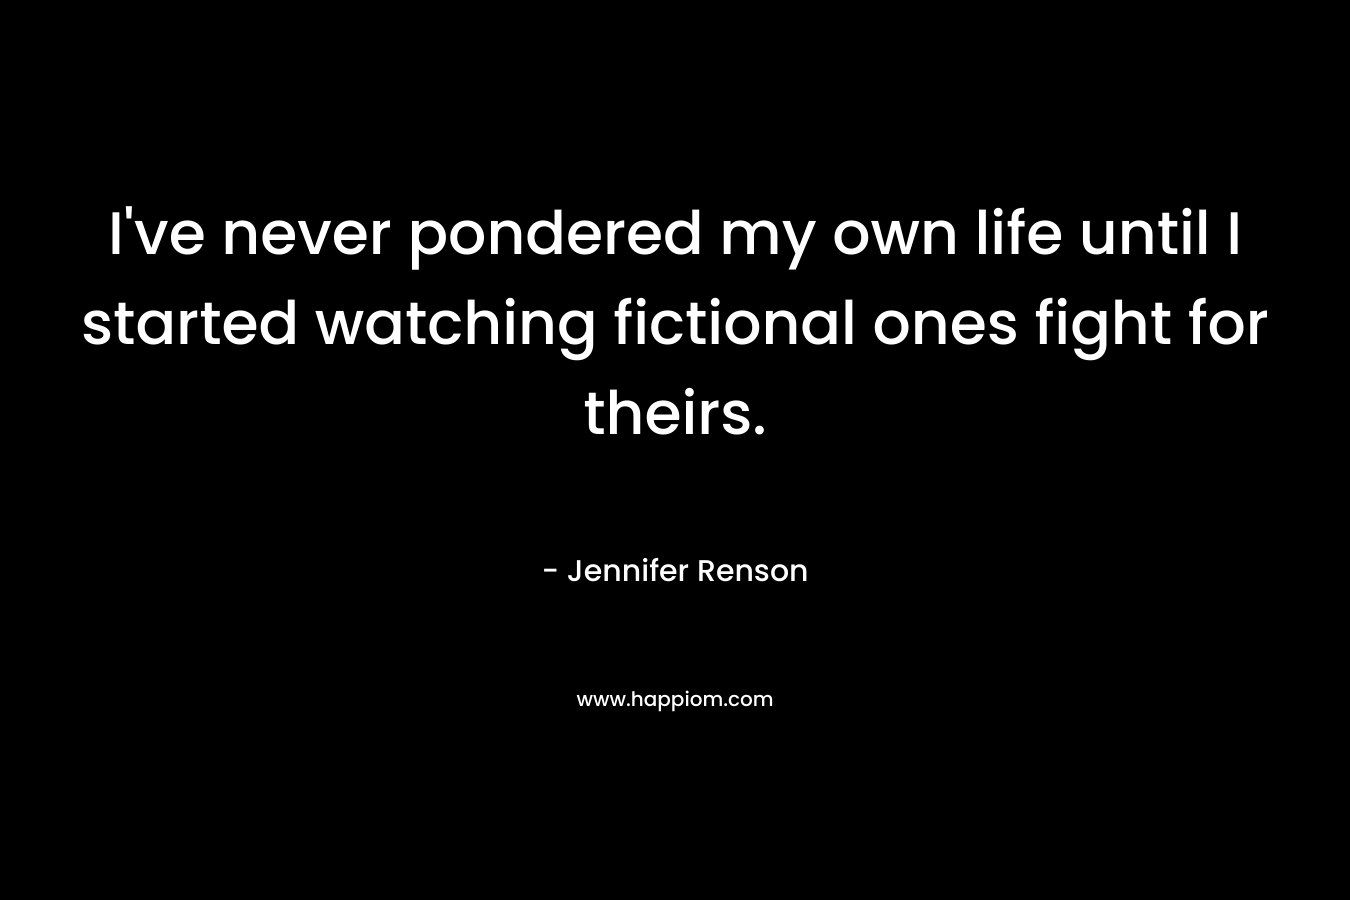 I’ve never pondered my own life until I started watching fictional ones fight for theirs. – Jennifer Renson